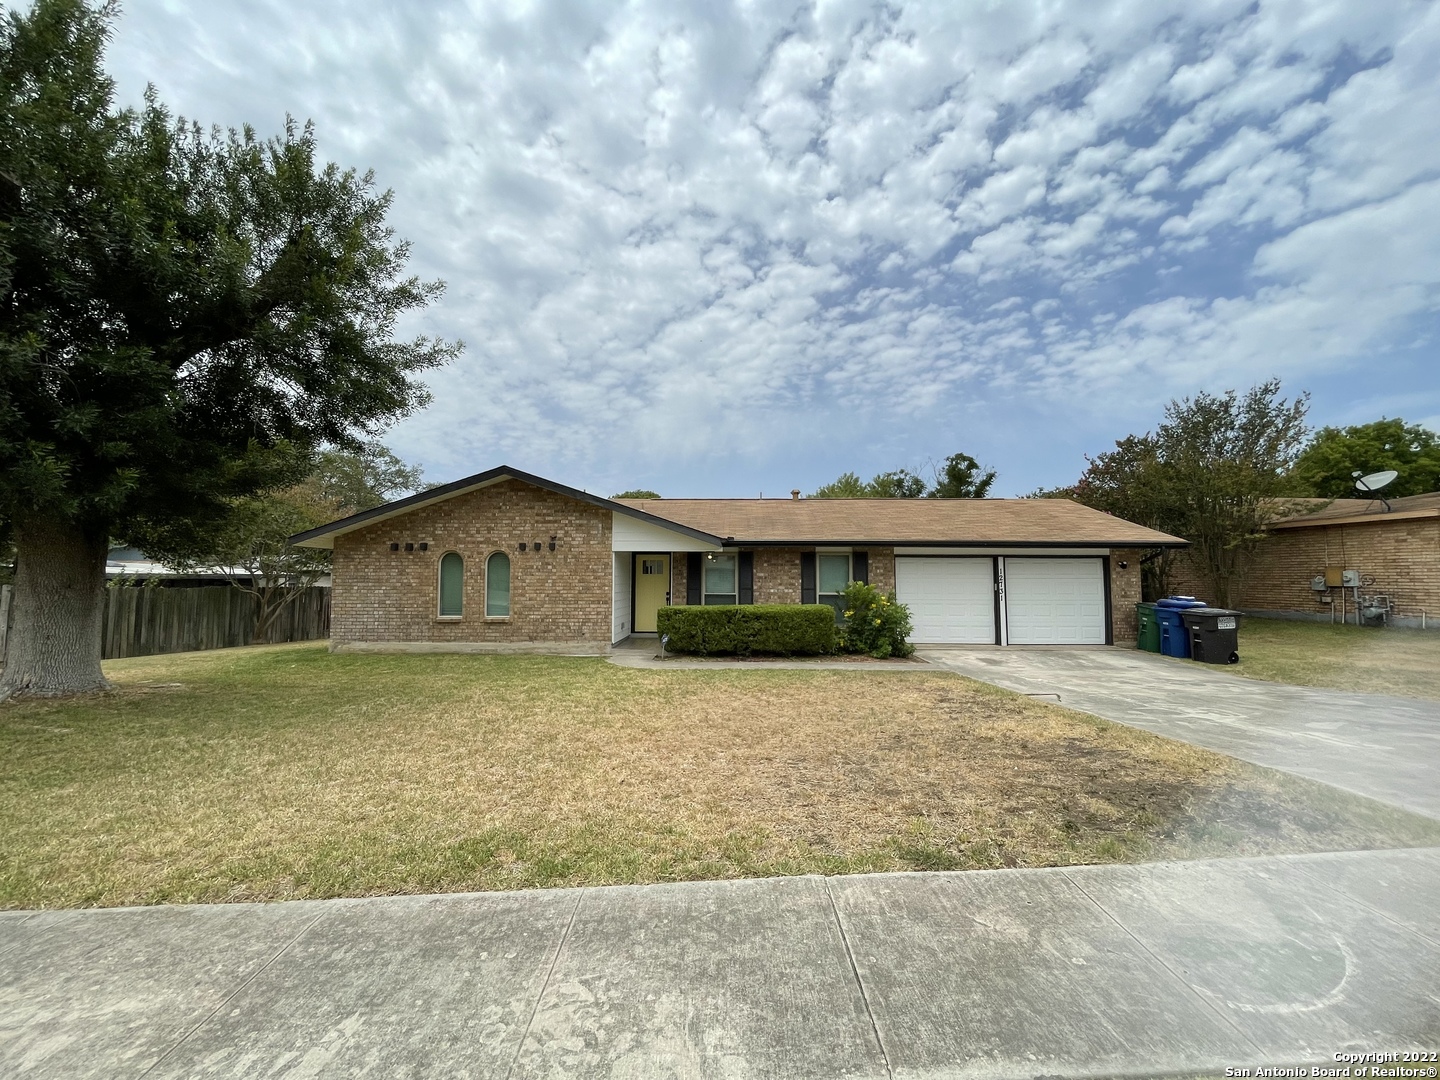 WOW! Don't miss out on this NEWLY remodeled home! 4 Bedroom 2 Bath home located in the El Dorado neighborhood, which means, NO HOA! This home has FRESH paint, NEW ceramic tile, NEW fixtures, NEW granite countertops, NEW cabinetry and more! The backyard is HUGE as well! DON'T MISS OUT!